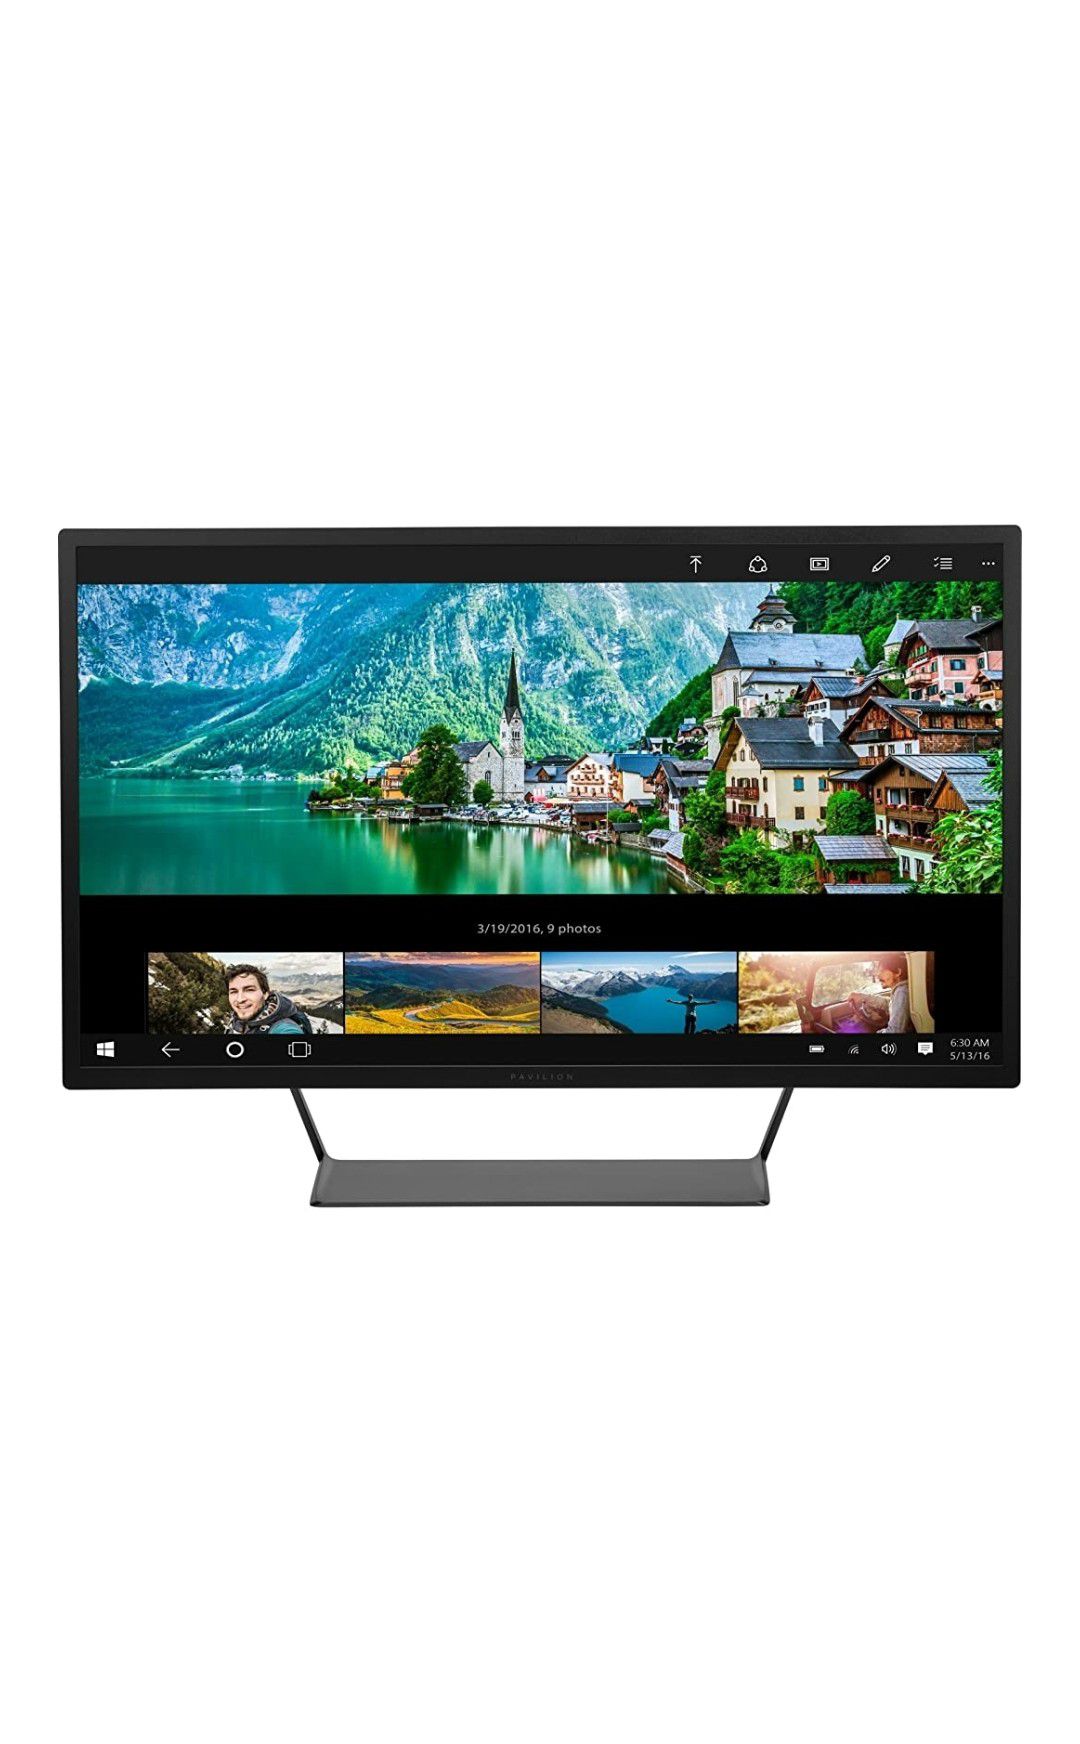 HP Pavilion 32-inch QHD Wide-Viewing Angle Display (V1M69AA#ABA)